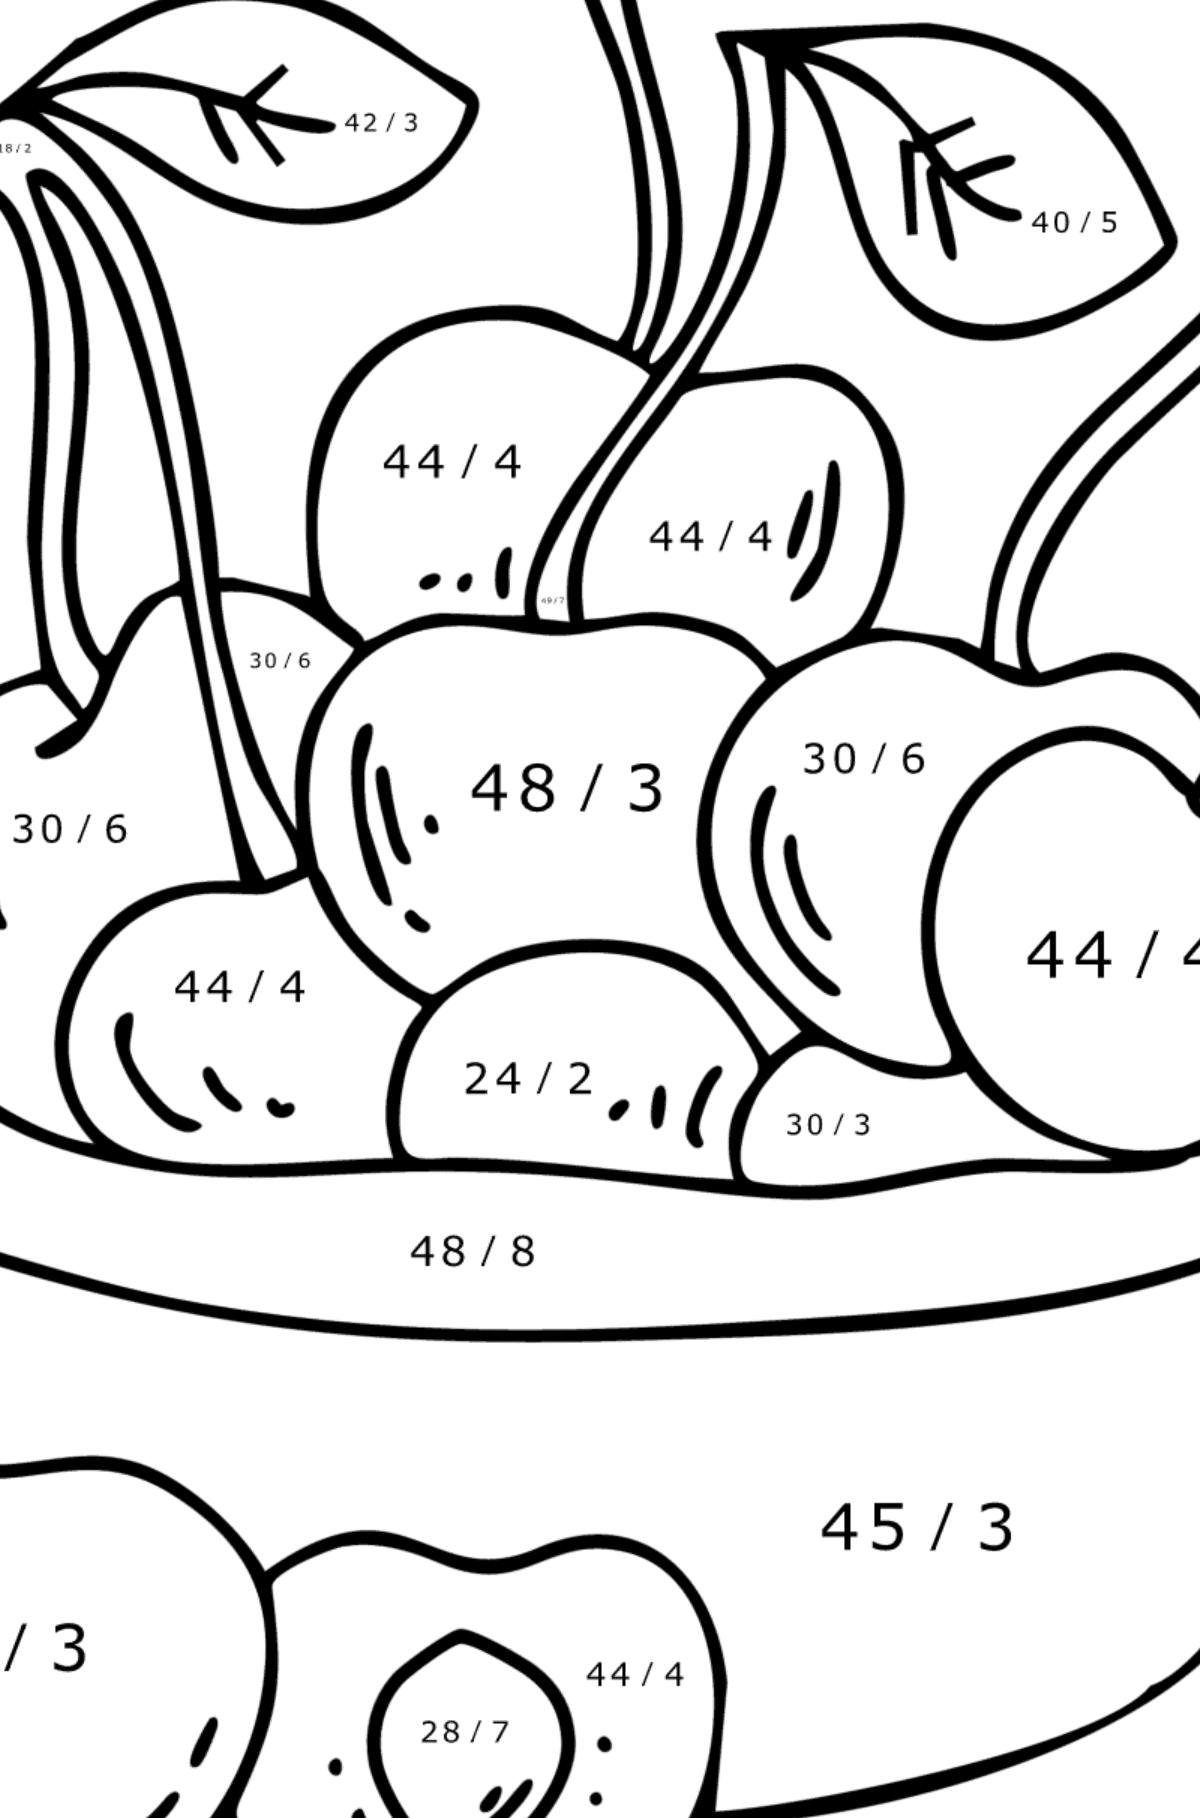 Cherries Plate Coloring Page - Math Coloring - Division for Kids